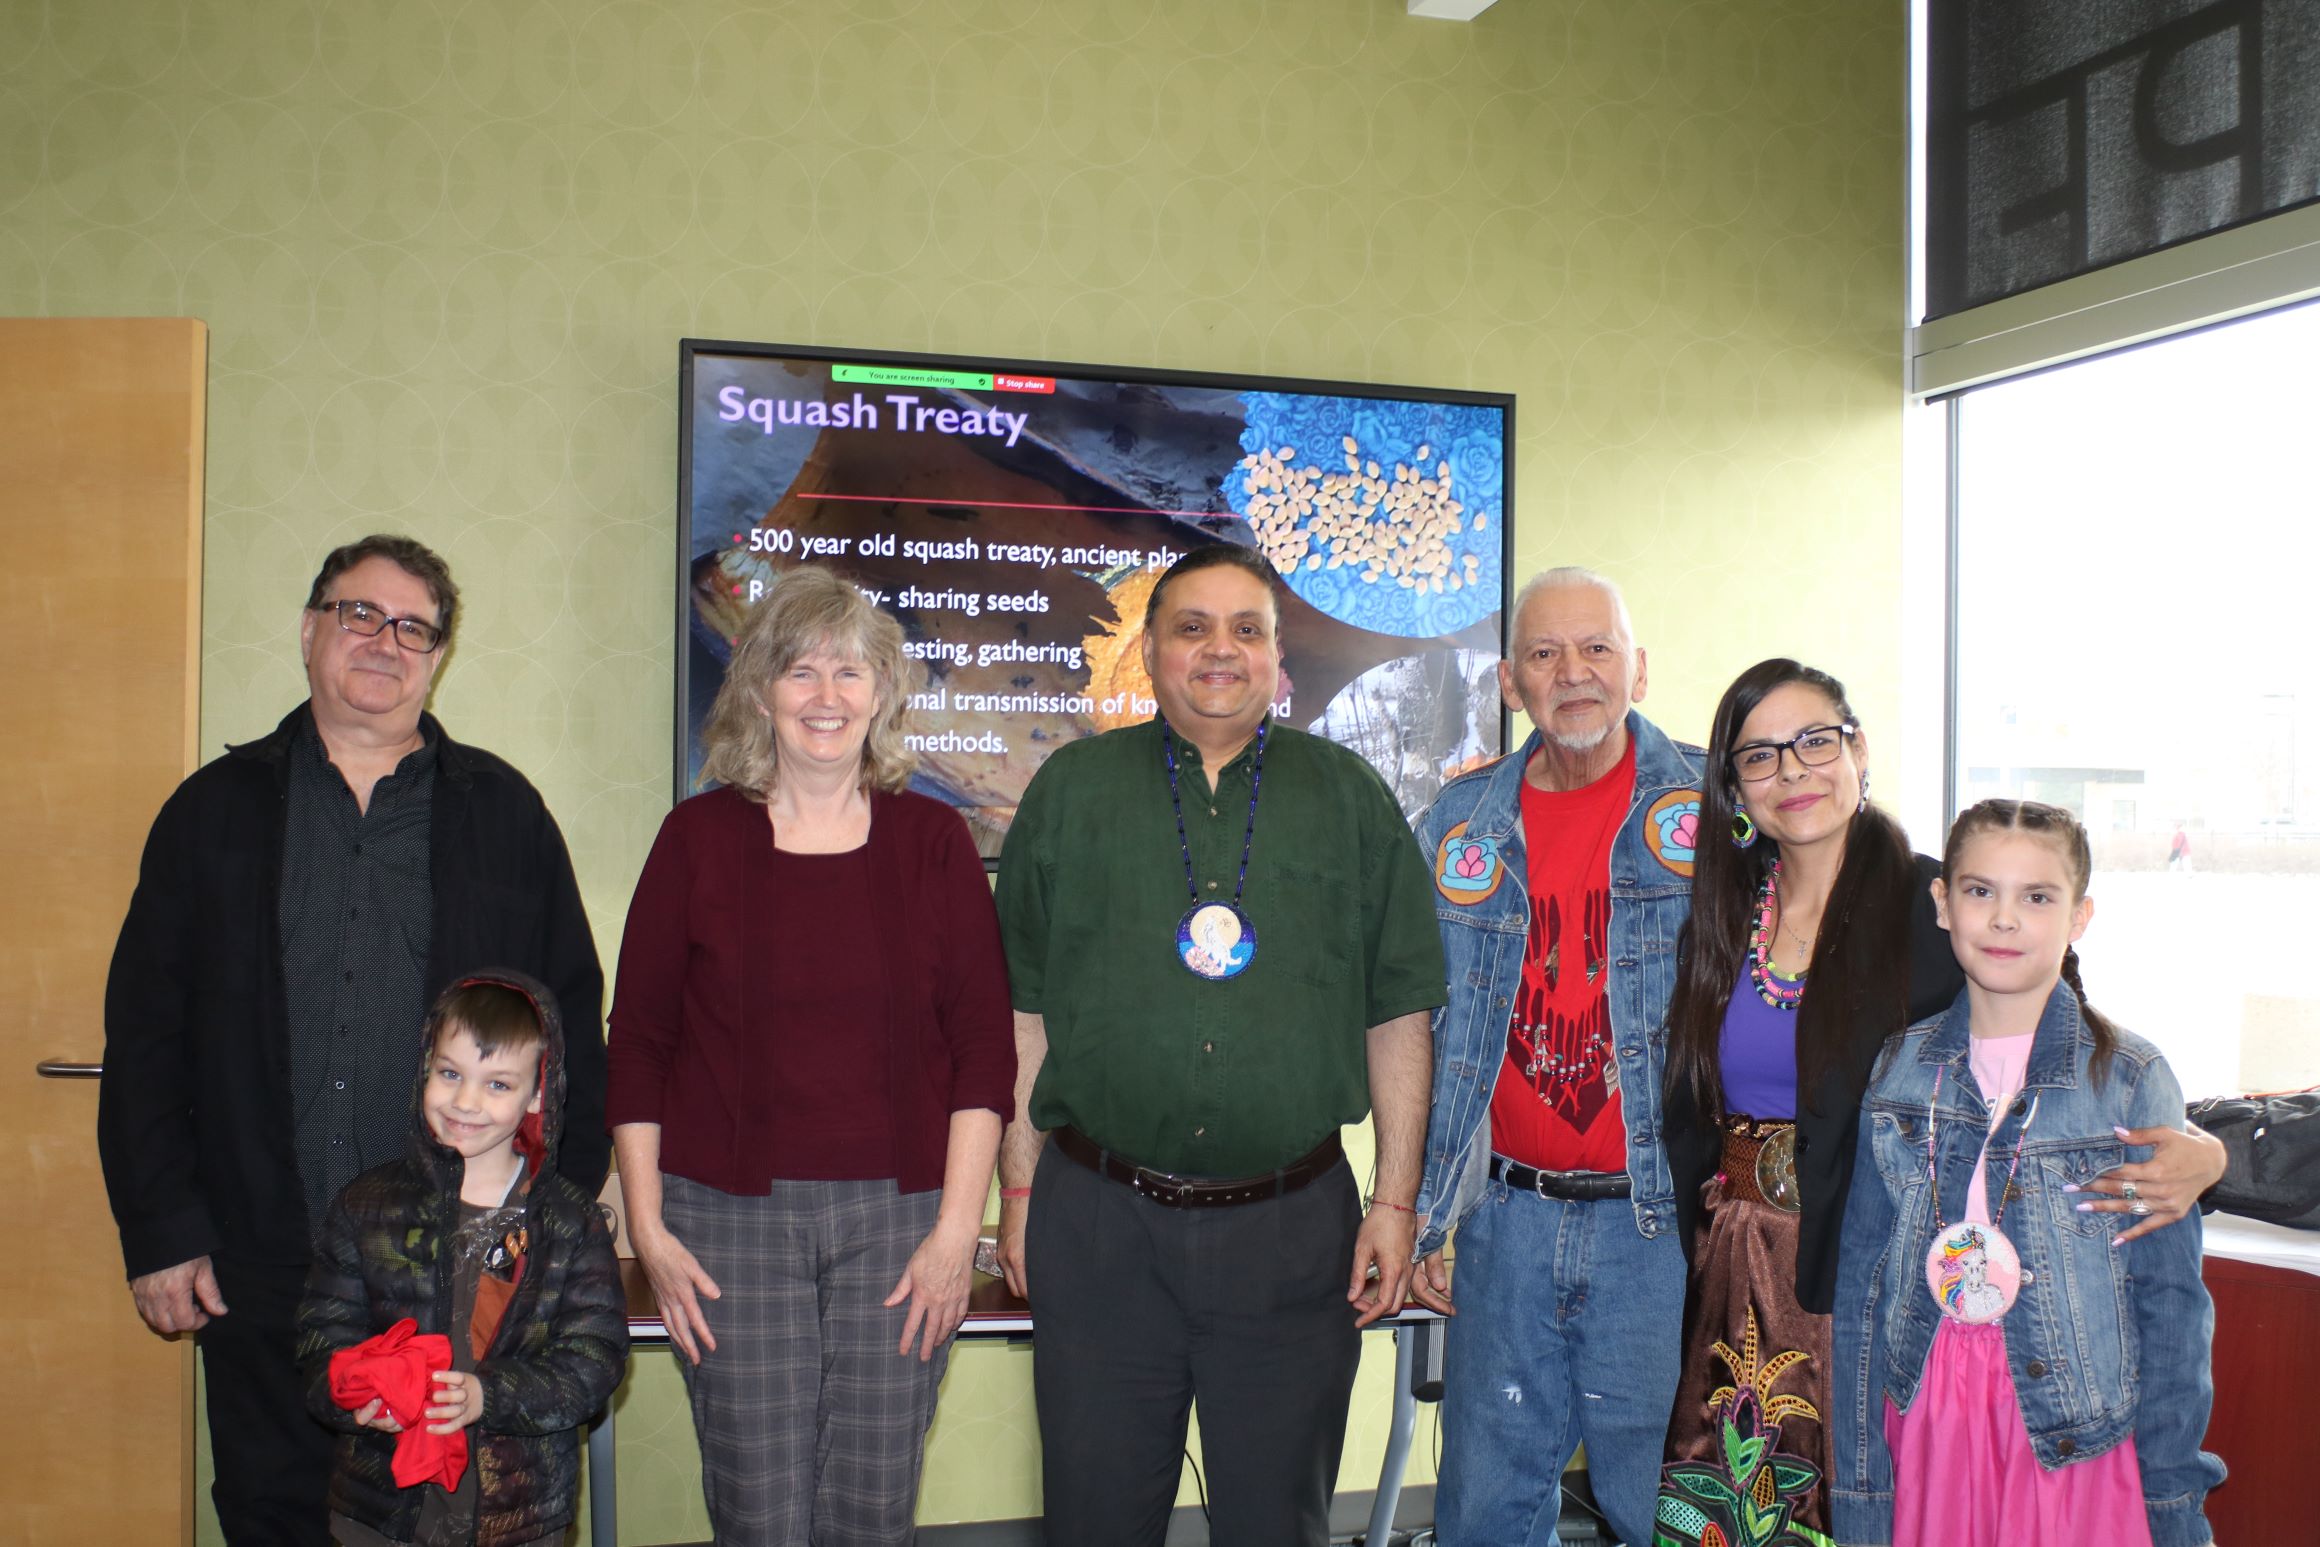 Dr. Mark Ruml, Dr. Shirley Thompson, Dr. Shailesh Shukla, Knowldege Keeper Dave Daniels, Anna Neil, and two children stand in a classroom with a video screen behind them.